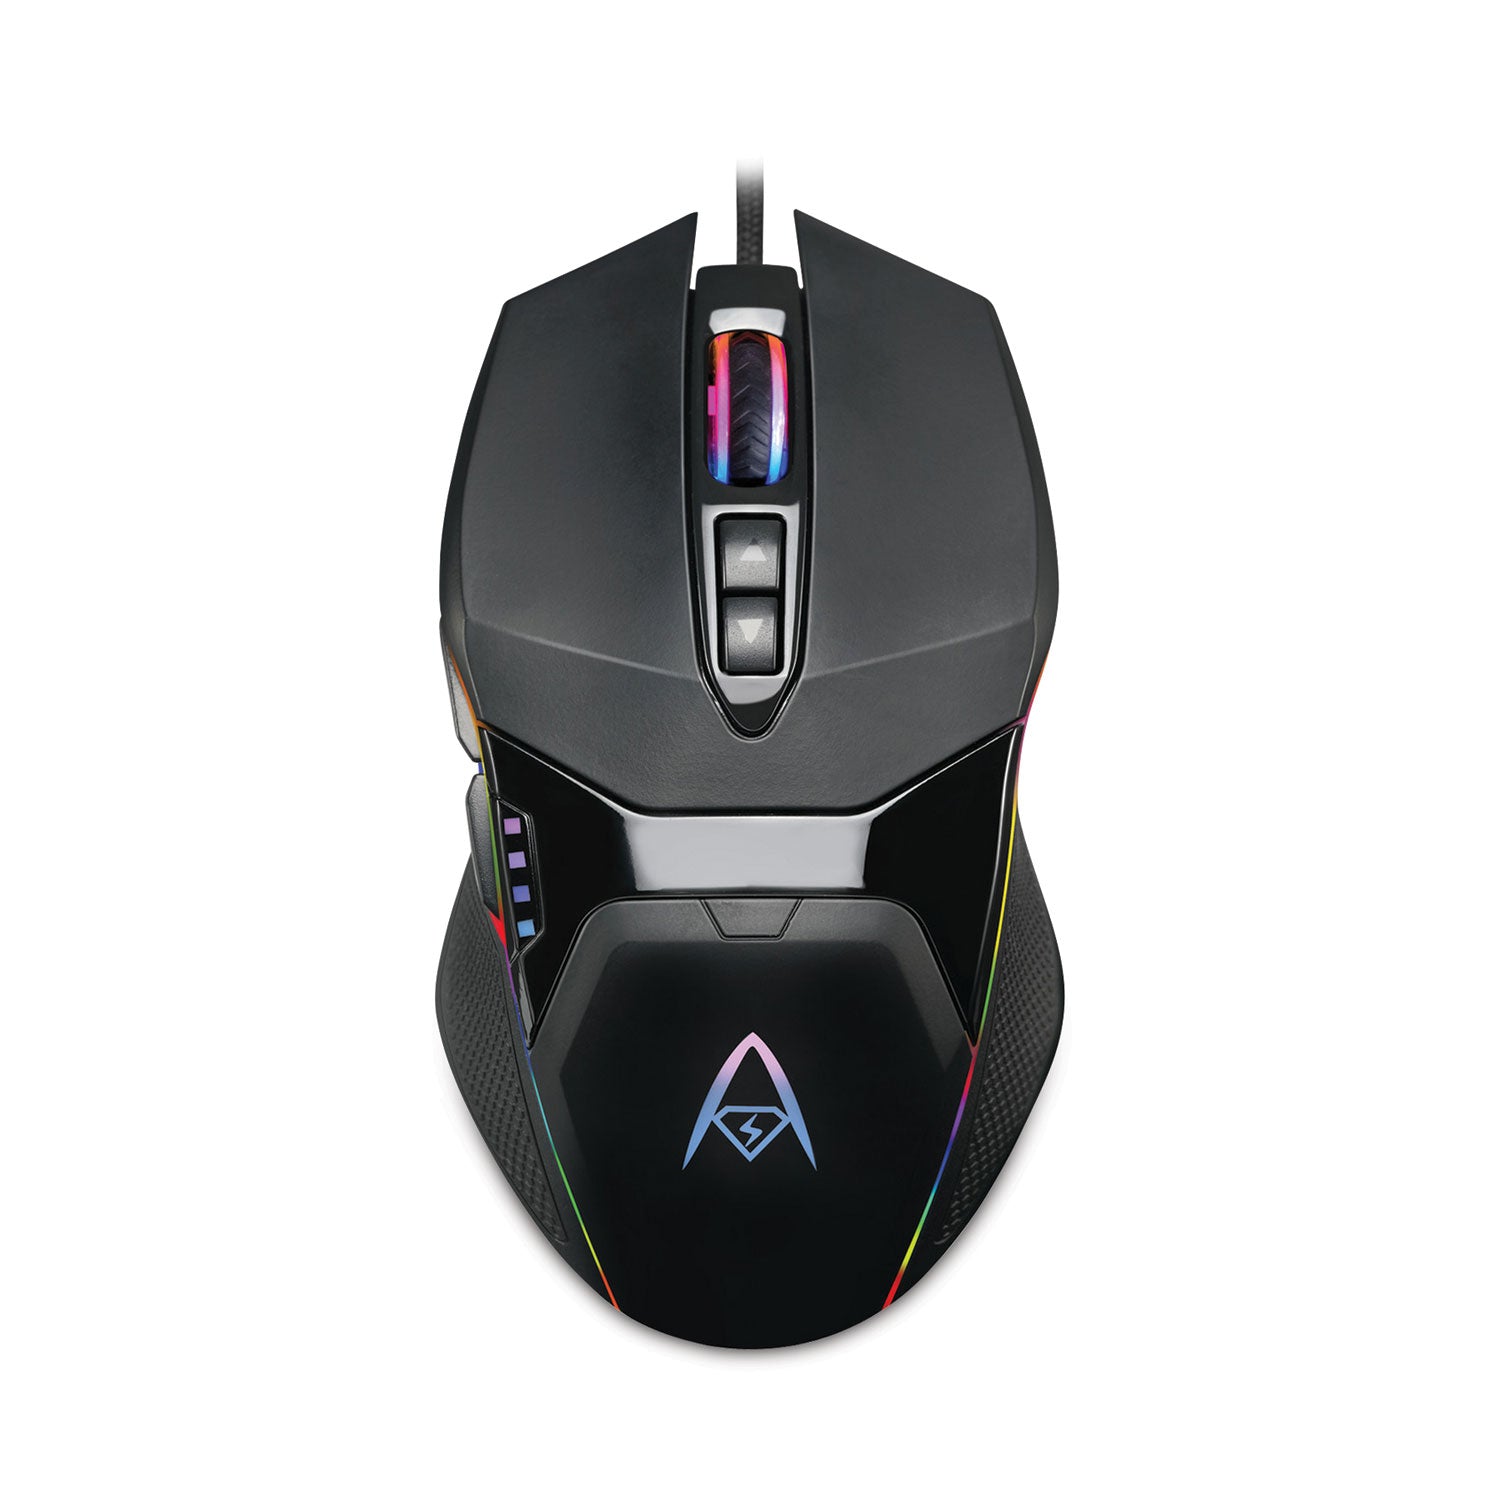 imouse-x5-illuminated-seven-button-gaming-mouse-usb-20-left-right-hand-use-black_adeimousex5 - 2